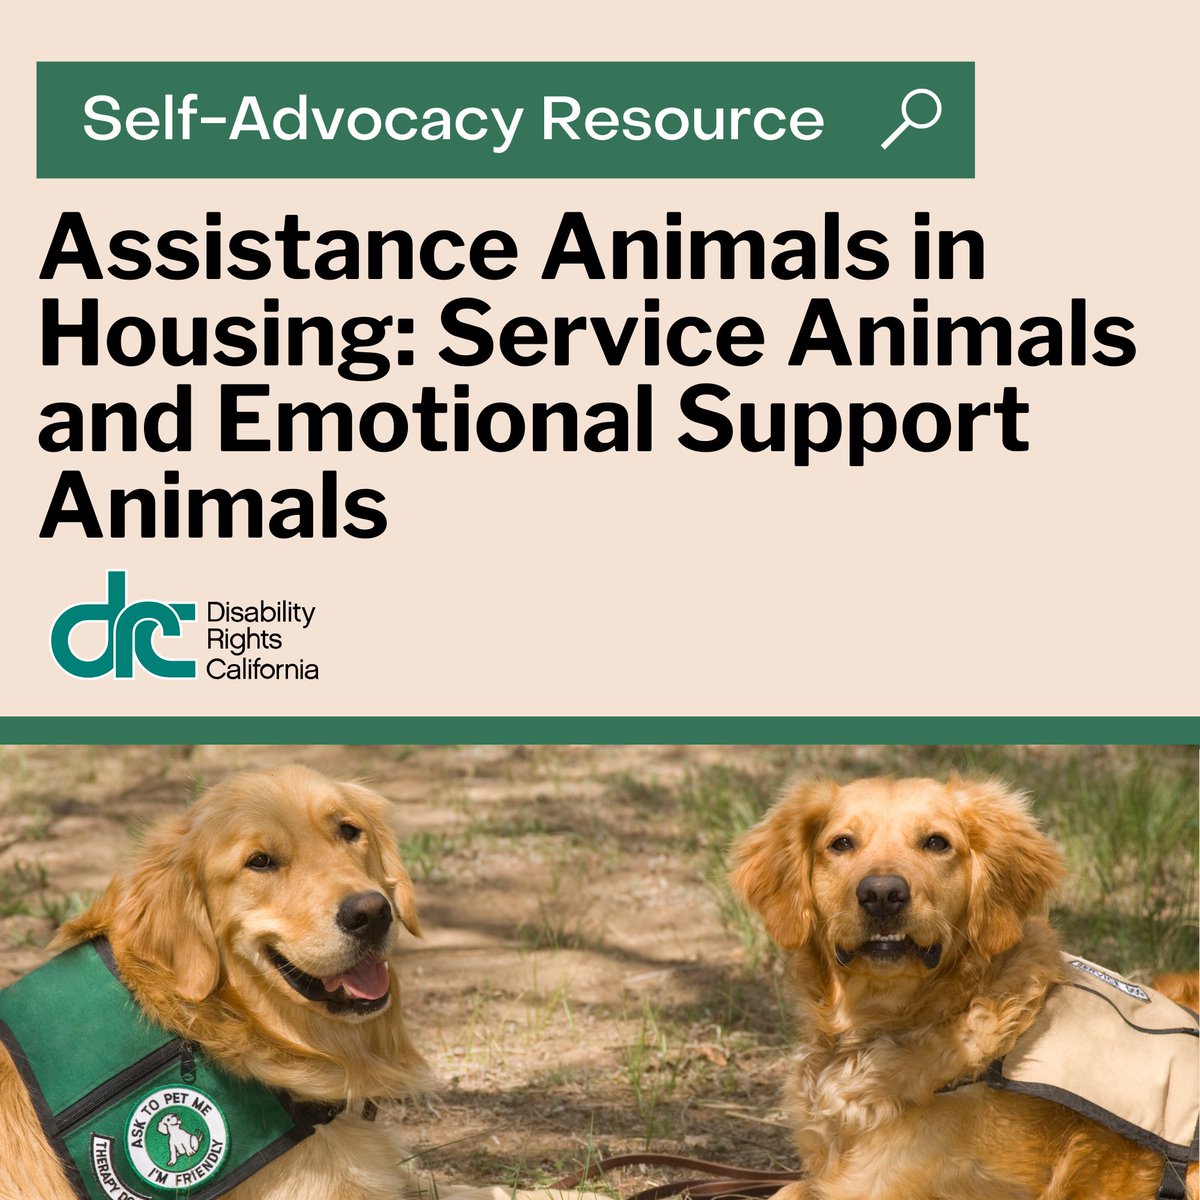 A service animal and an emotional support animal are two different categories of animals that can assist people with disabilities. Understanding the legal differences between the two types of assistance animals is important because the rules that apply to your situation may be